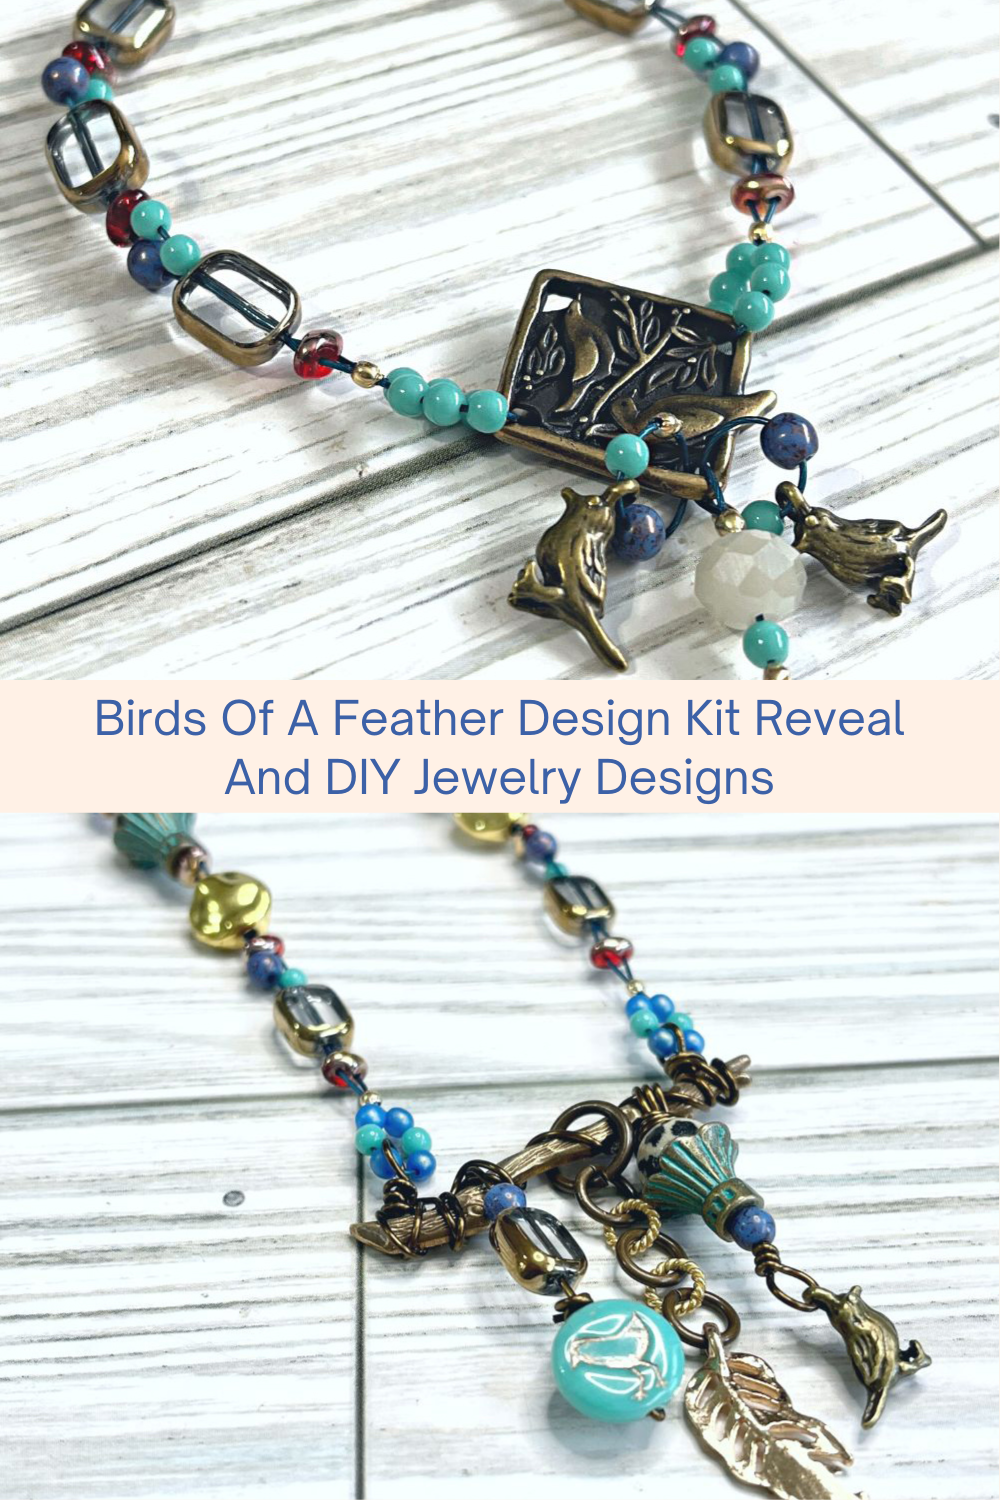 Birds Of A Feather Design Kit Reveal And DIY Jewelry Designs Collage